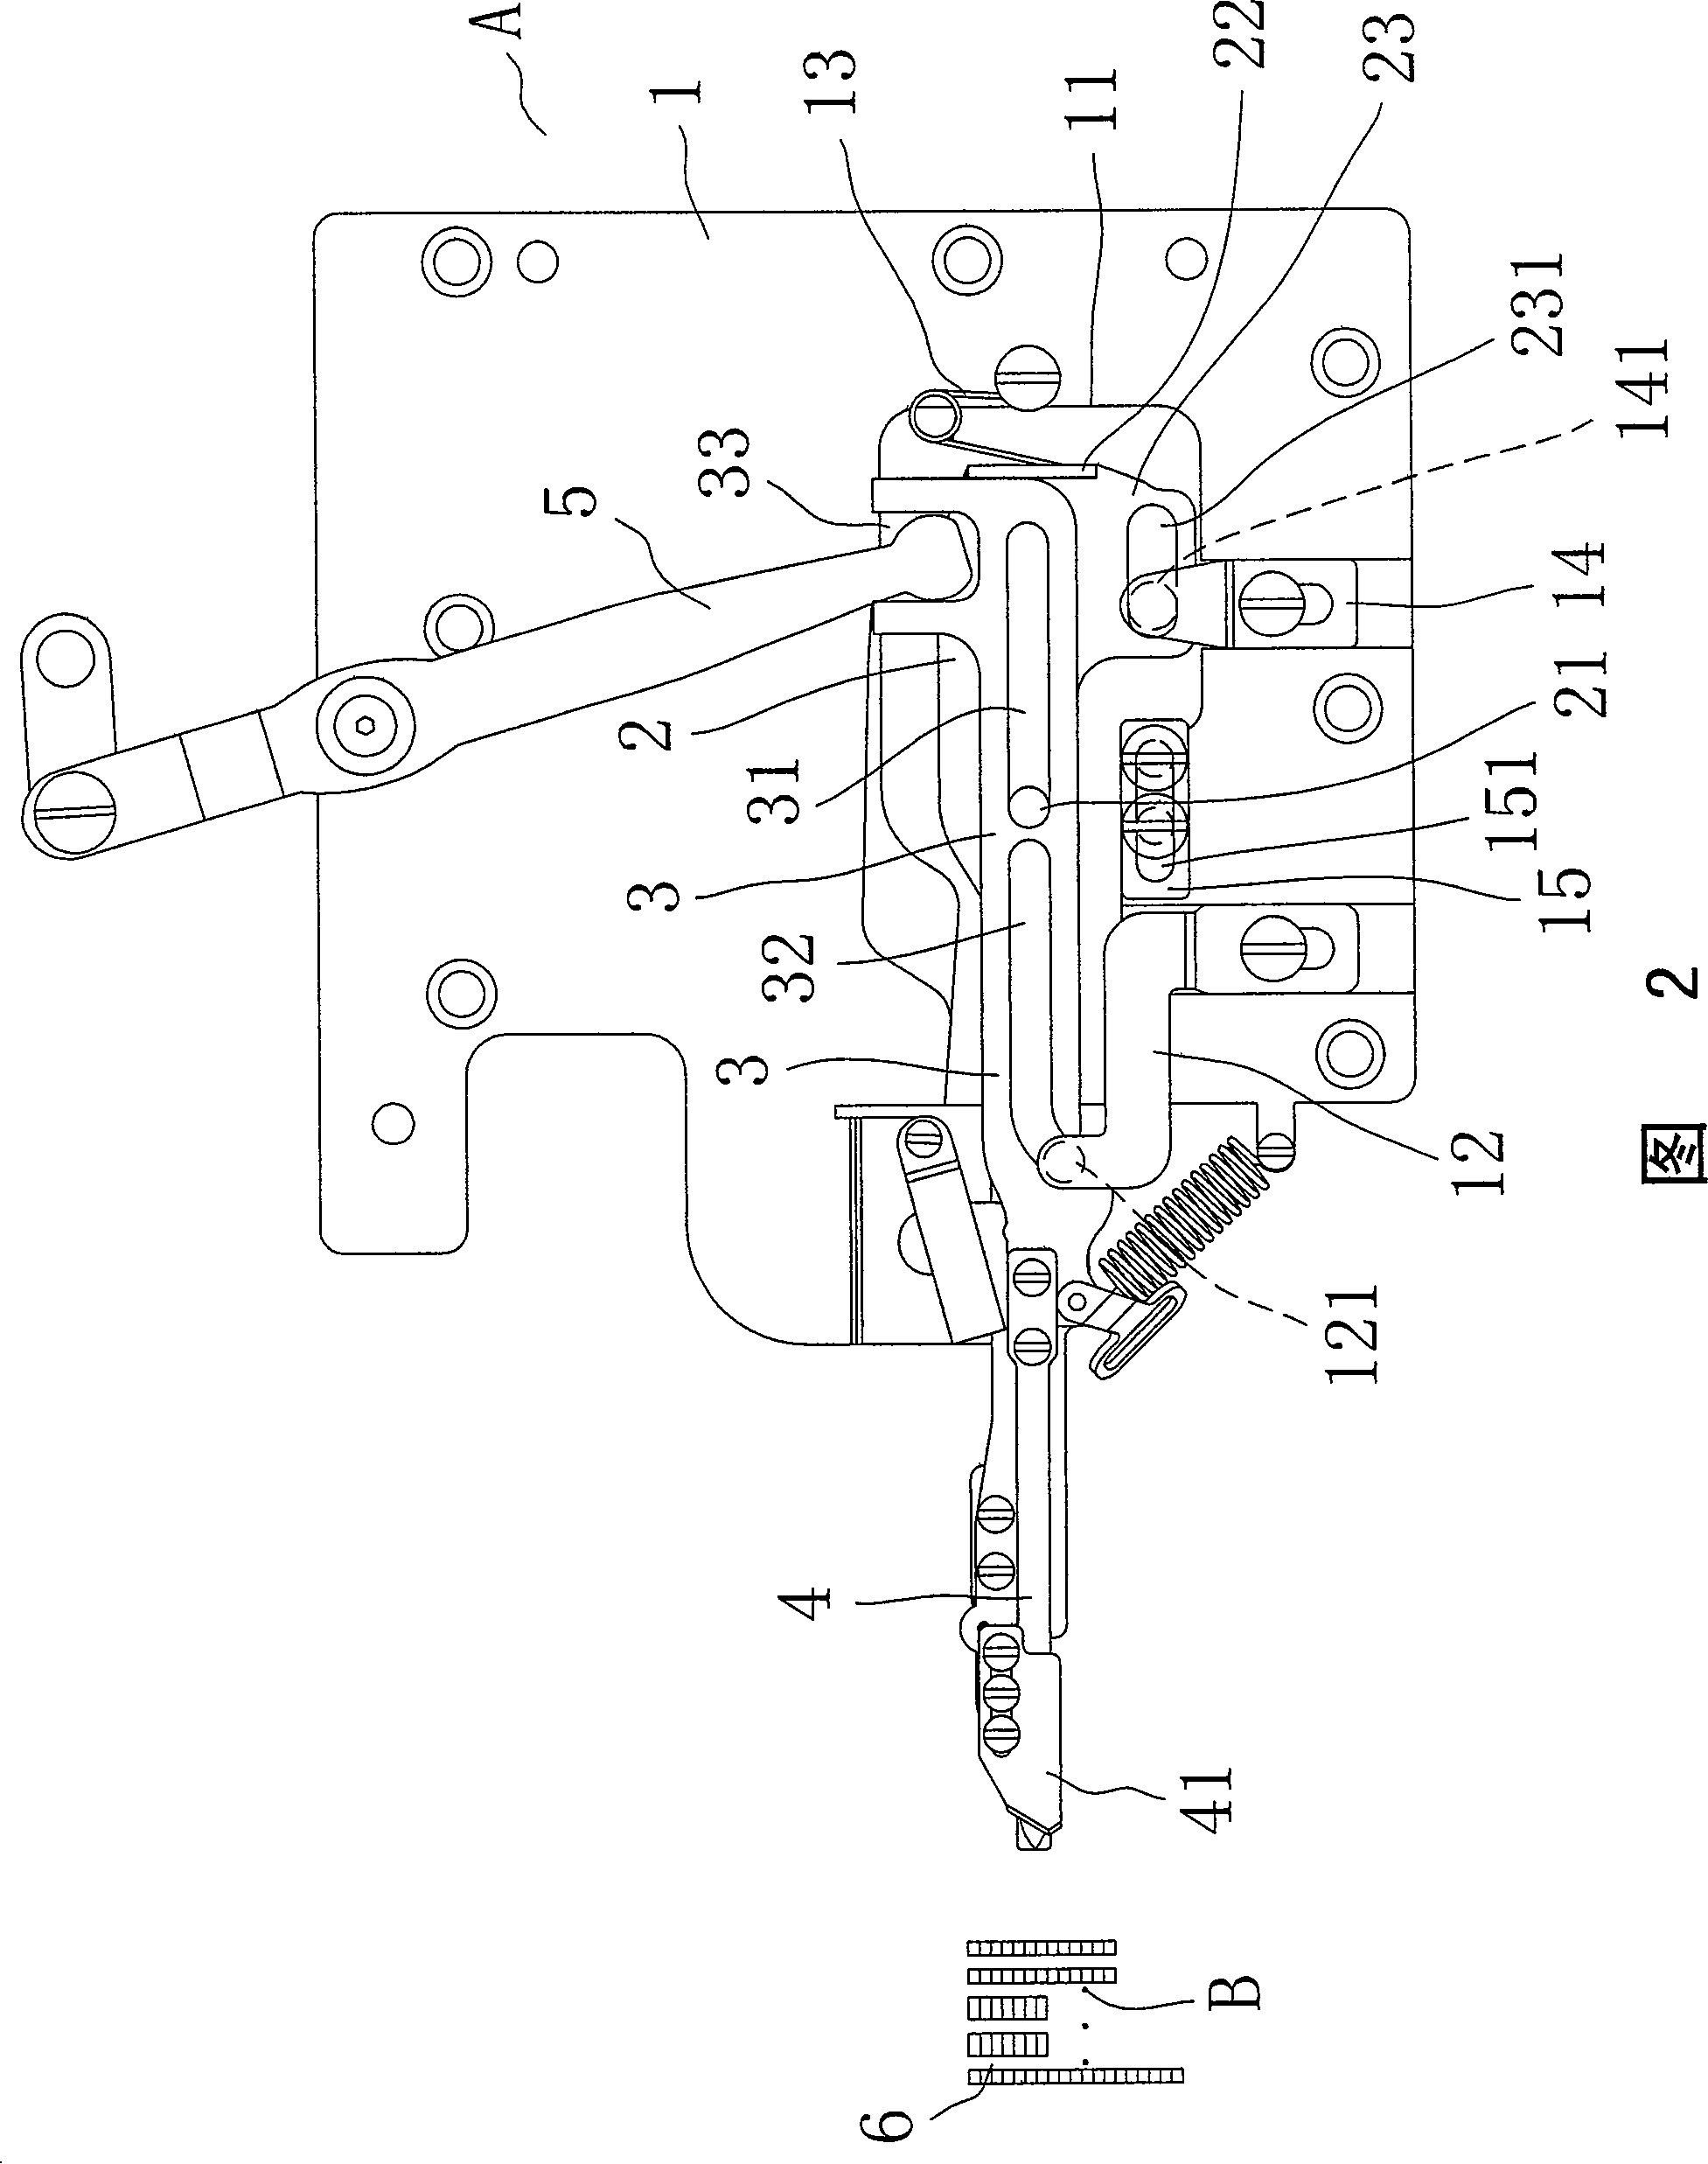 Bottom wire-cutting device capable of adjusting length of cut suture line